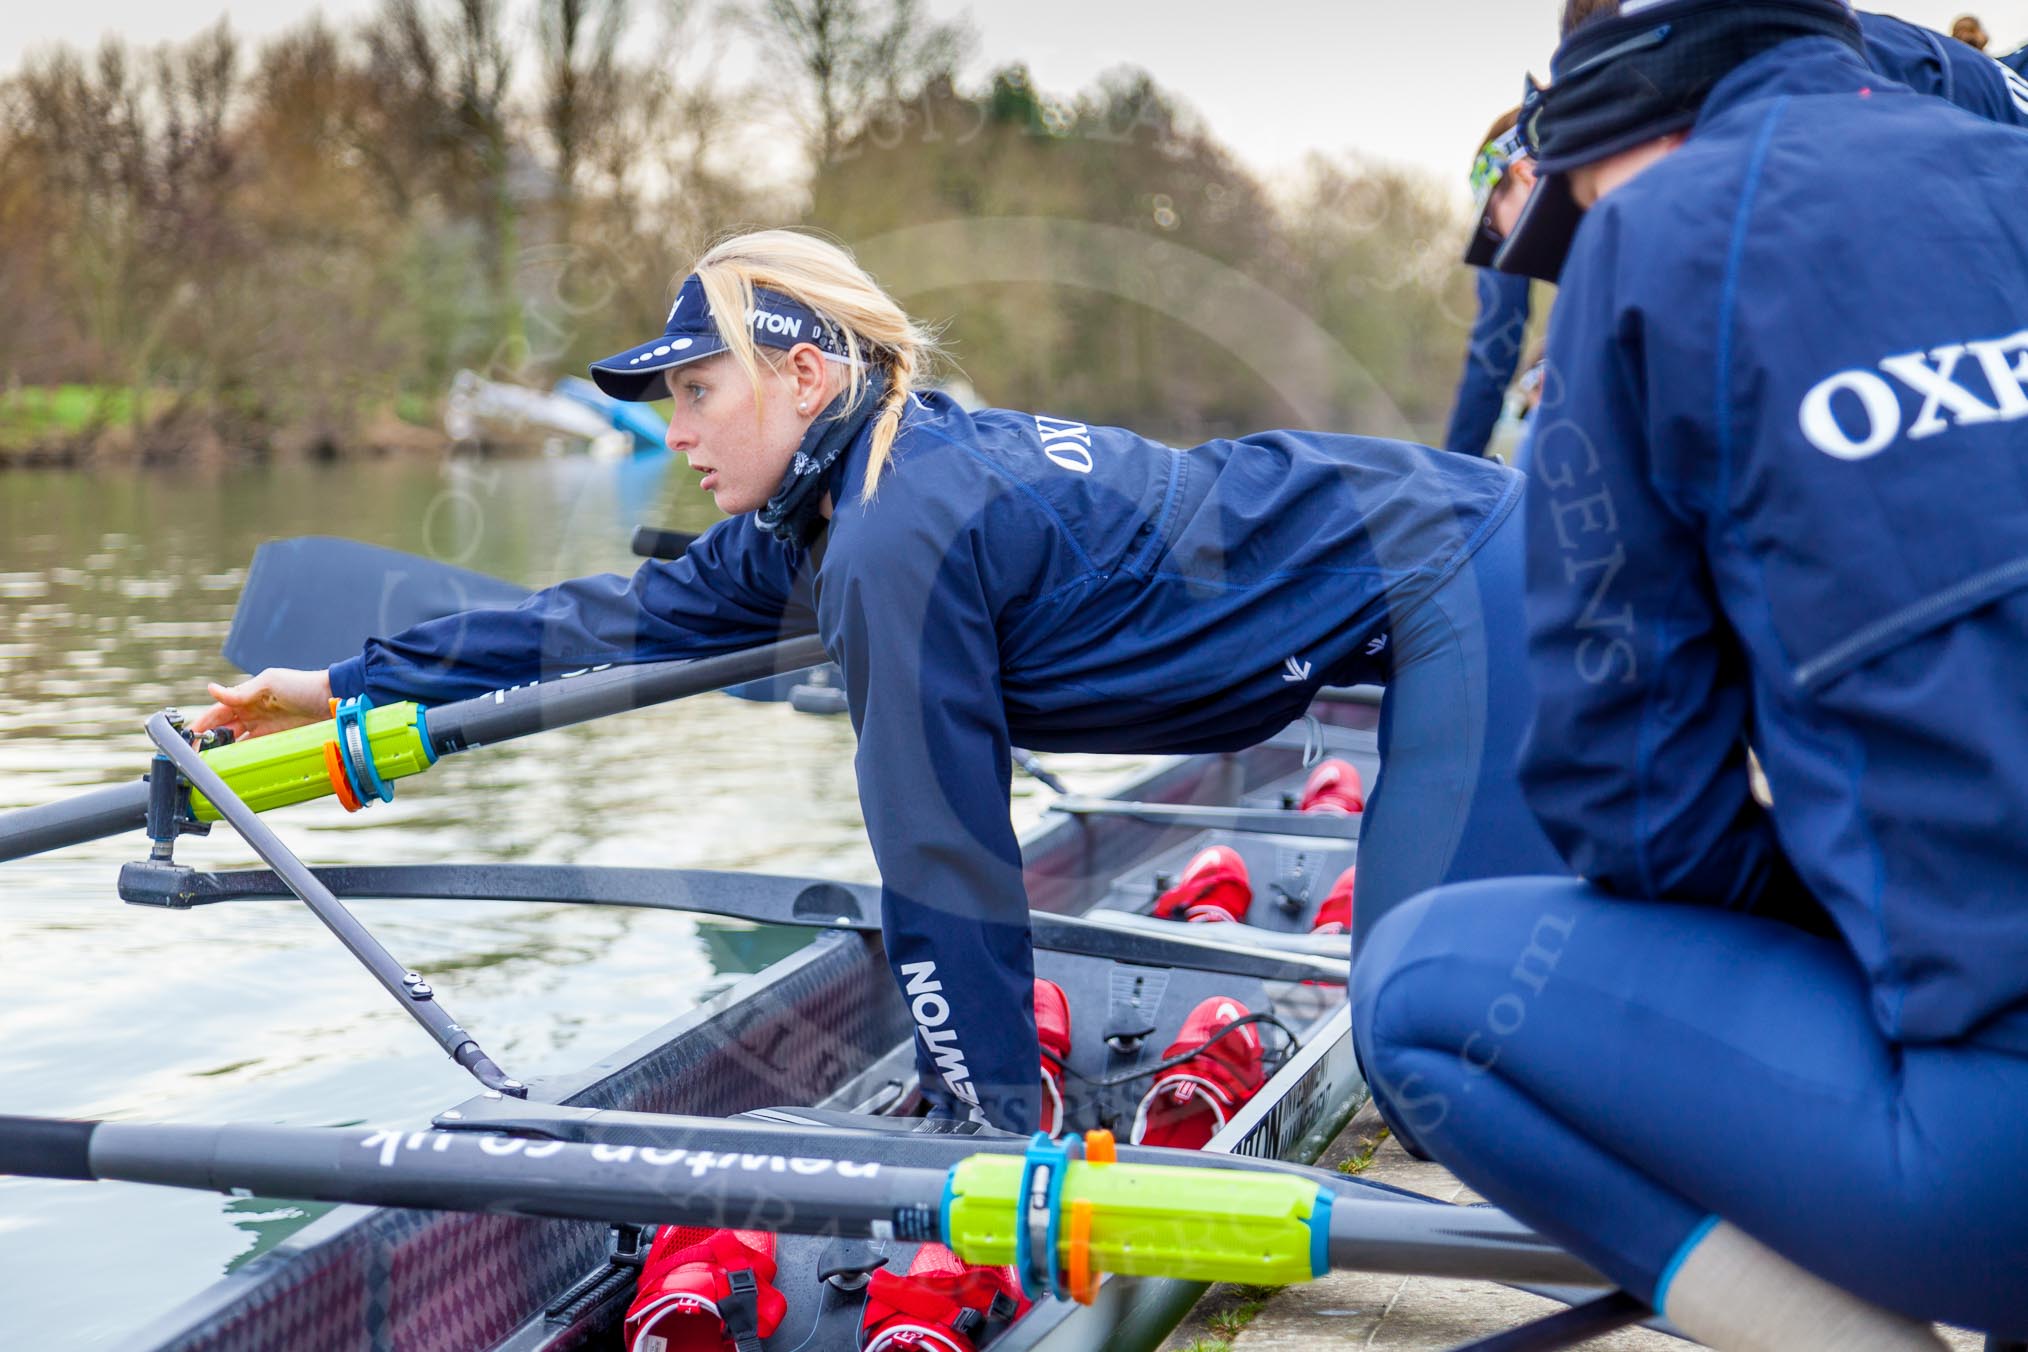 The Boat Race season 2016 - OUWBC training Wallingford: The OUWBC Blue Boat crew getting ready for their training session on the Thames at Wallingford, here 2 seat Emma Spruce.
River Thames,
Wallingford,
Oxfordshire,

on 29 February 2016 at 15:32, image #55